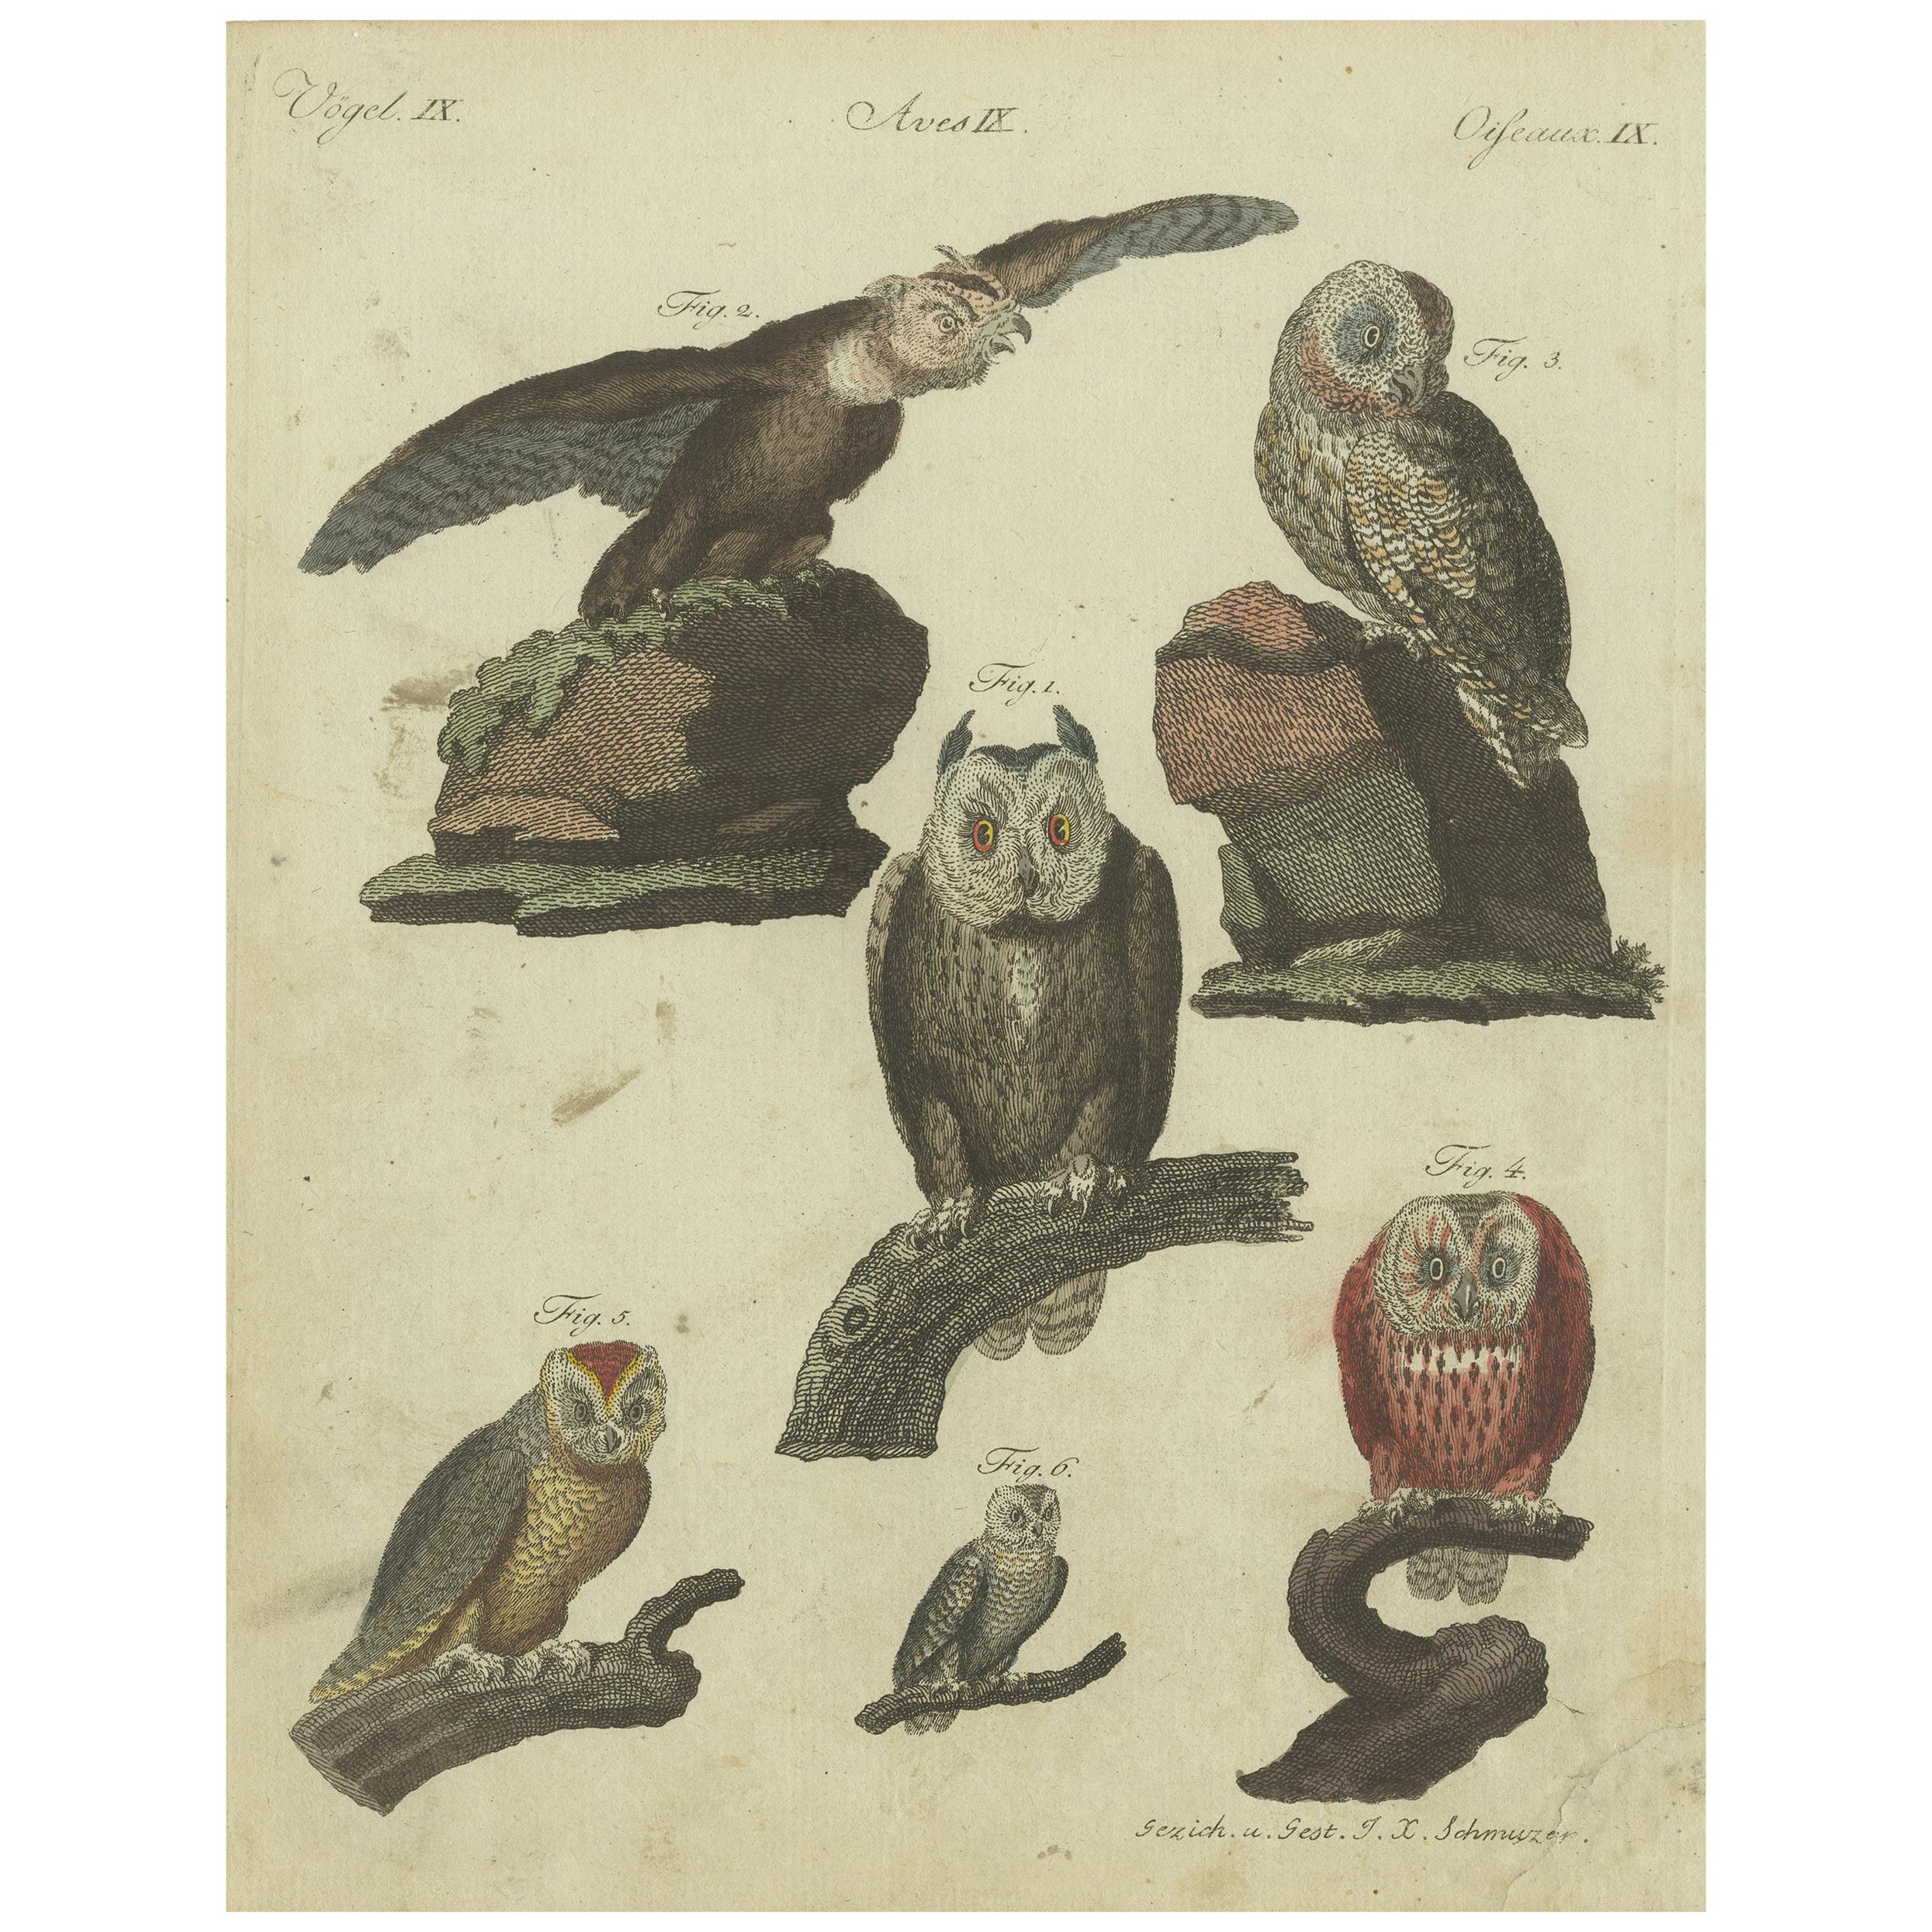 Antique Animal Print of various Owl Species by Bertuch, circa 1800